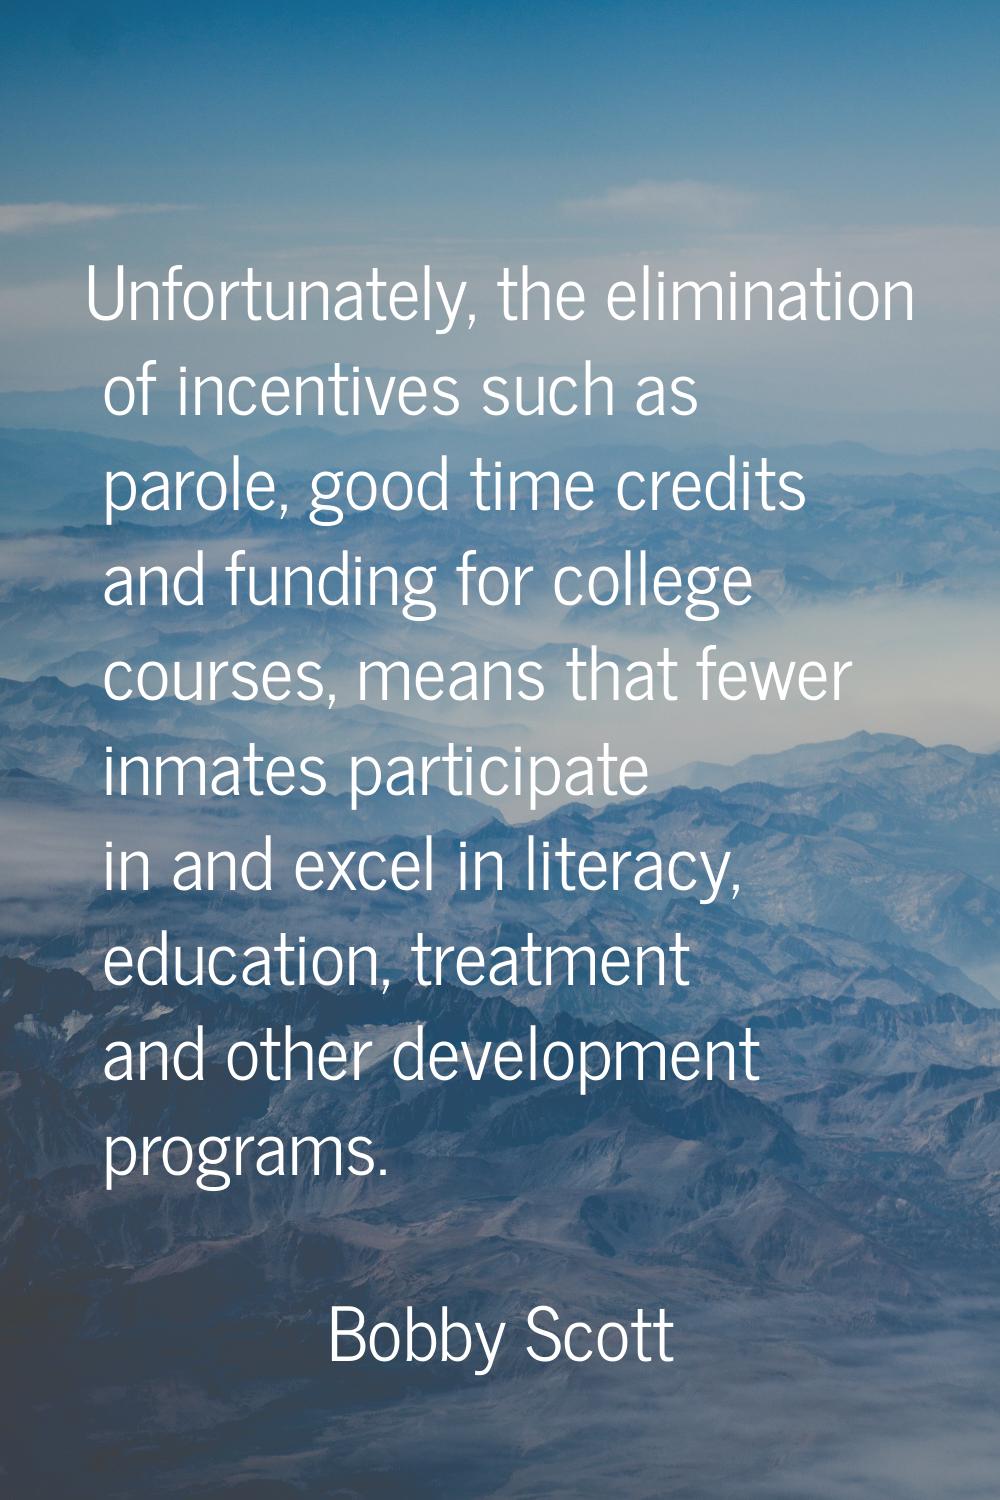 Unfortunately, the elimination of incentives such as parole, good time credits and funding for coll